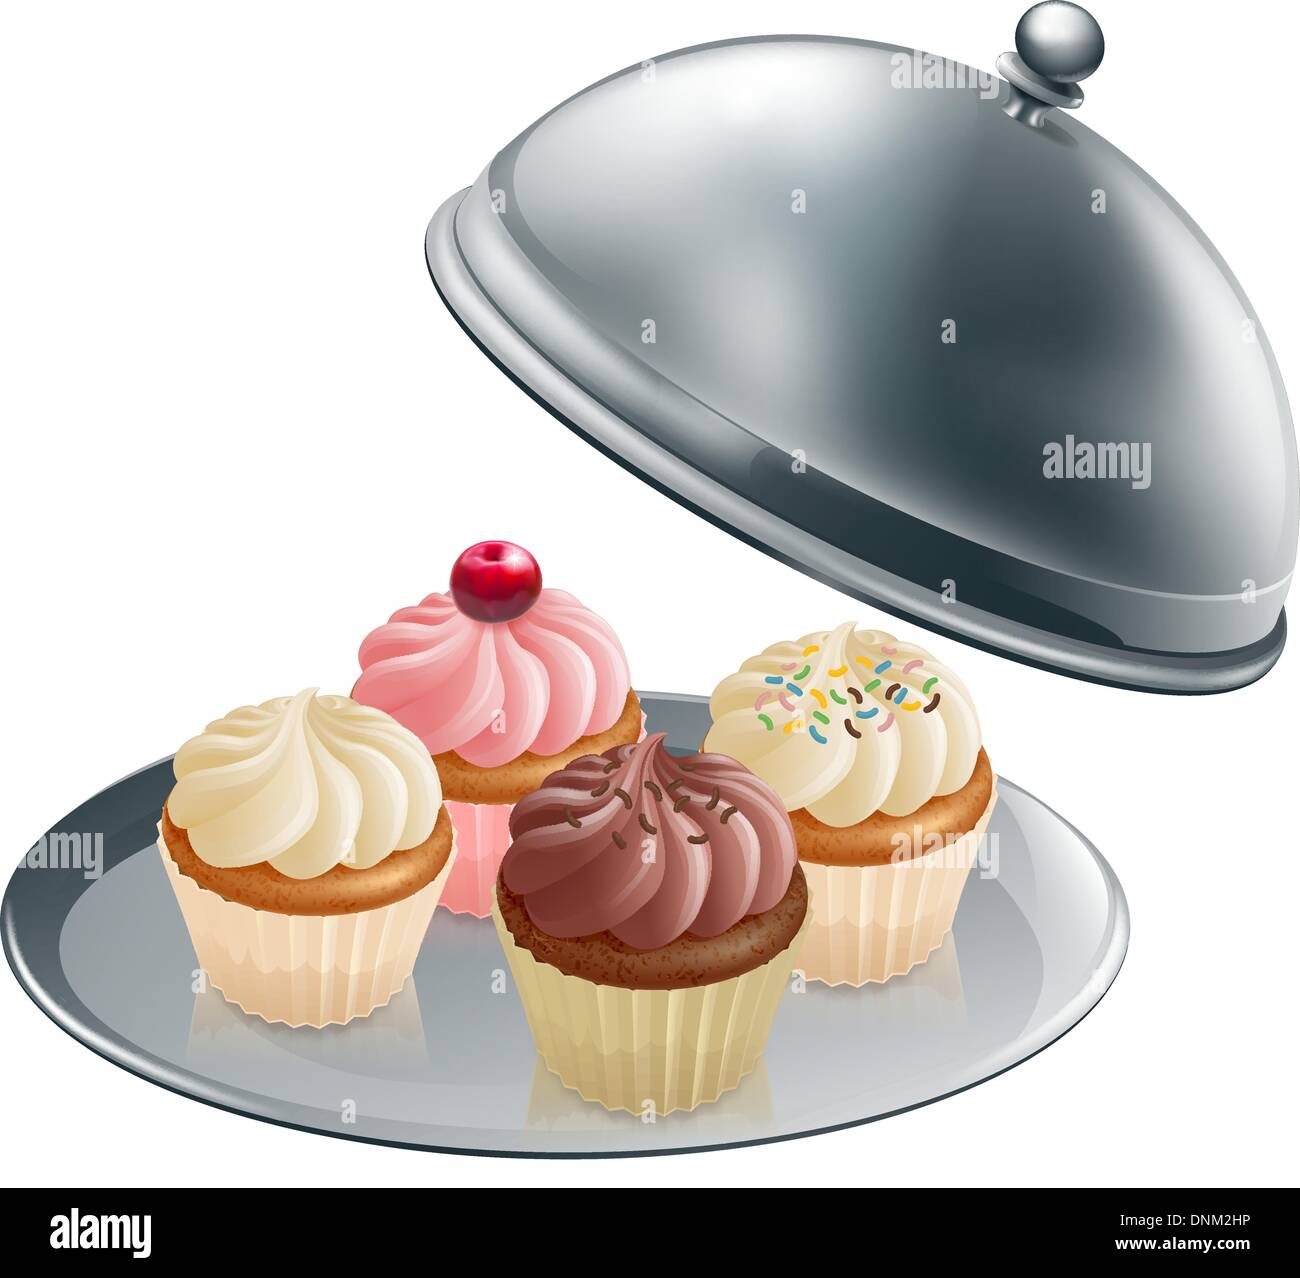 Illustration of different flavour cupcakes on a silver platter Stock Vector